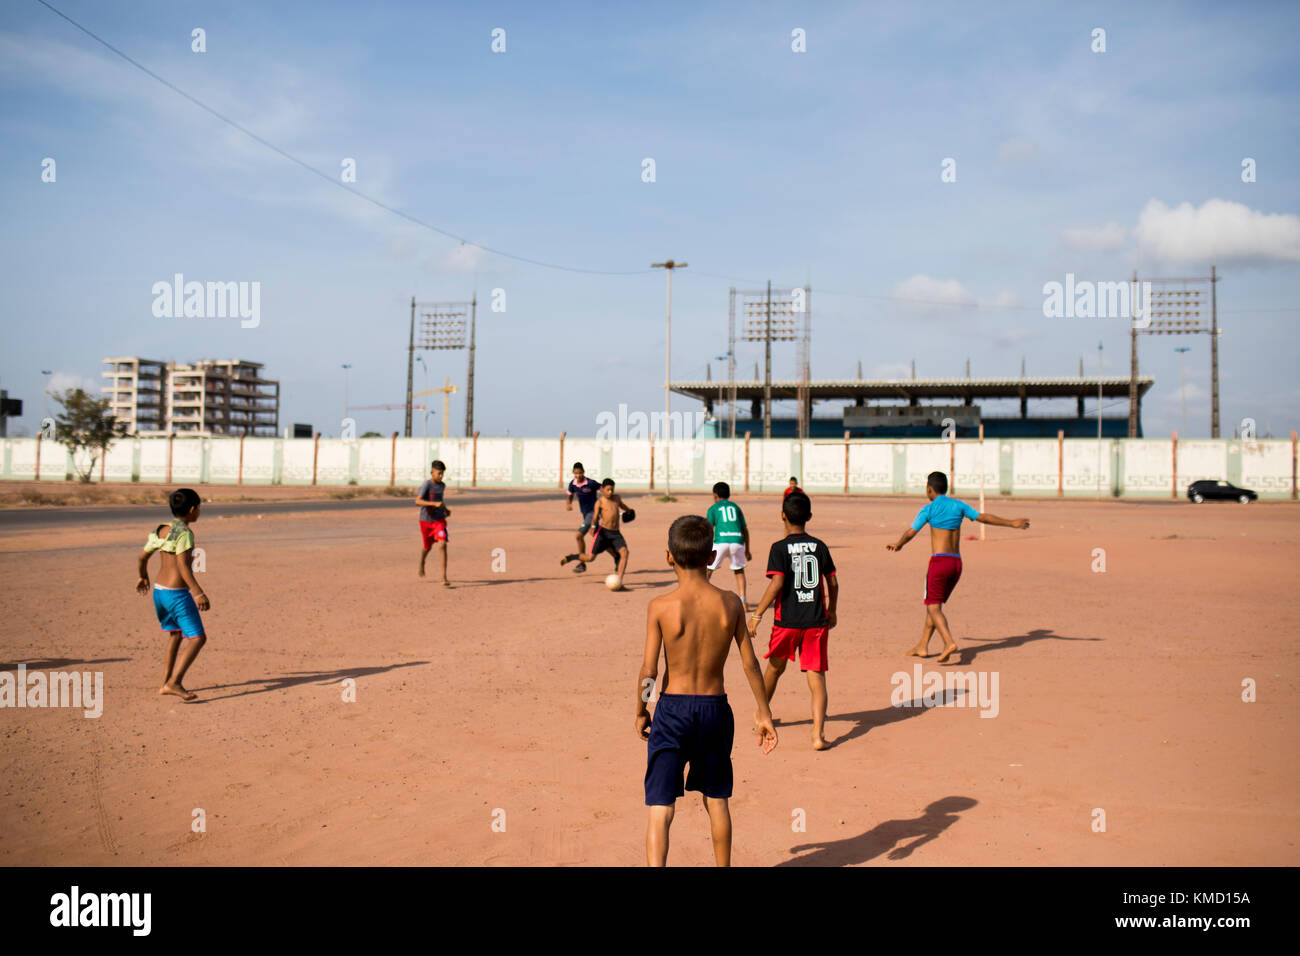 Macapa, Brazil. 17th Nov, 2017. Children play football on a field directly behind the equator in Macapa, Brazil, 17 November 2017. Measurements show that the equator draws through the Zerao soccer stadium without touching the centre line. Credit: Autumn Sonnichsen/dpa/Alamy Live News Stock Photo